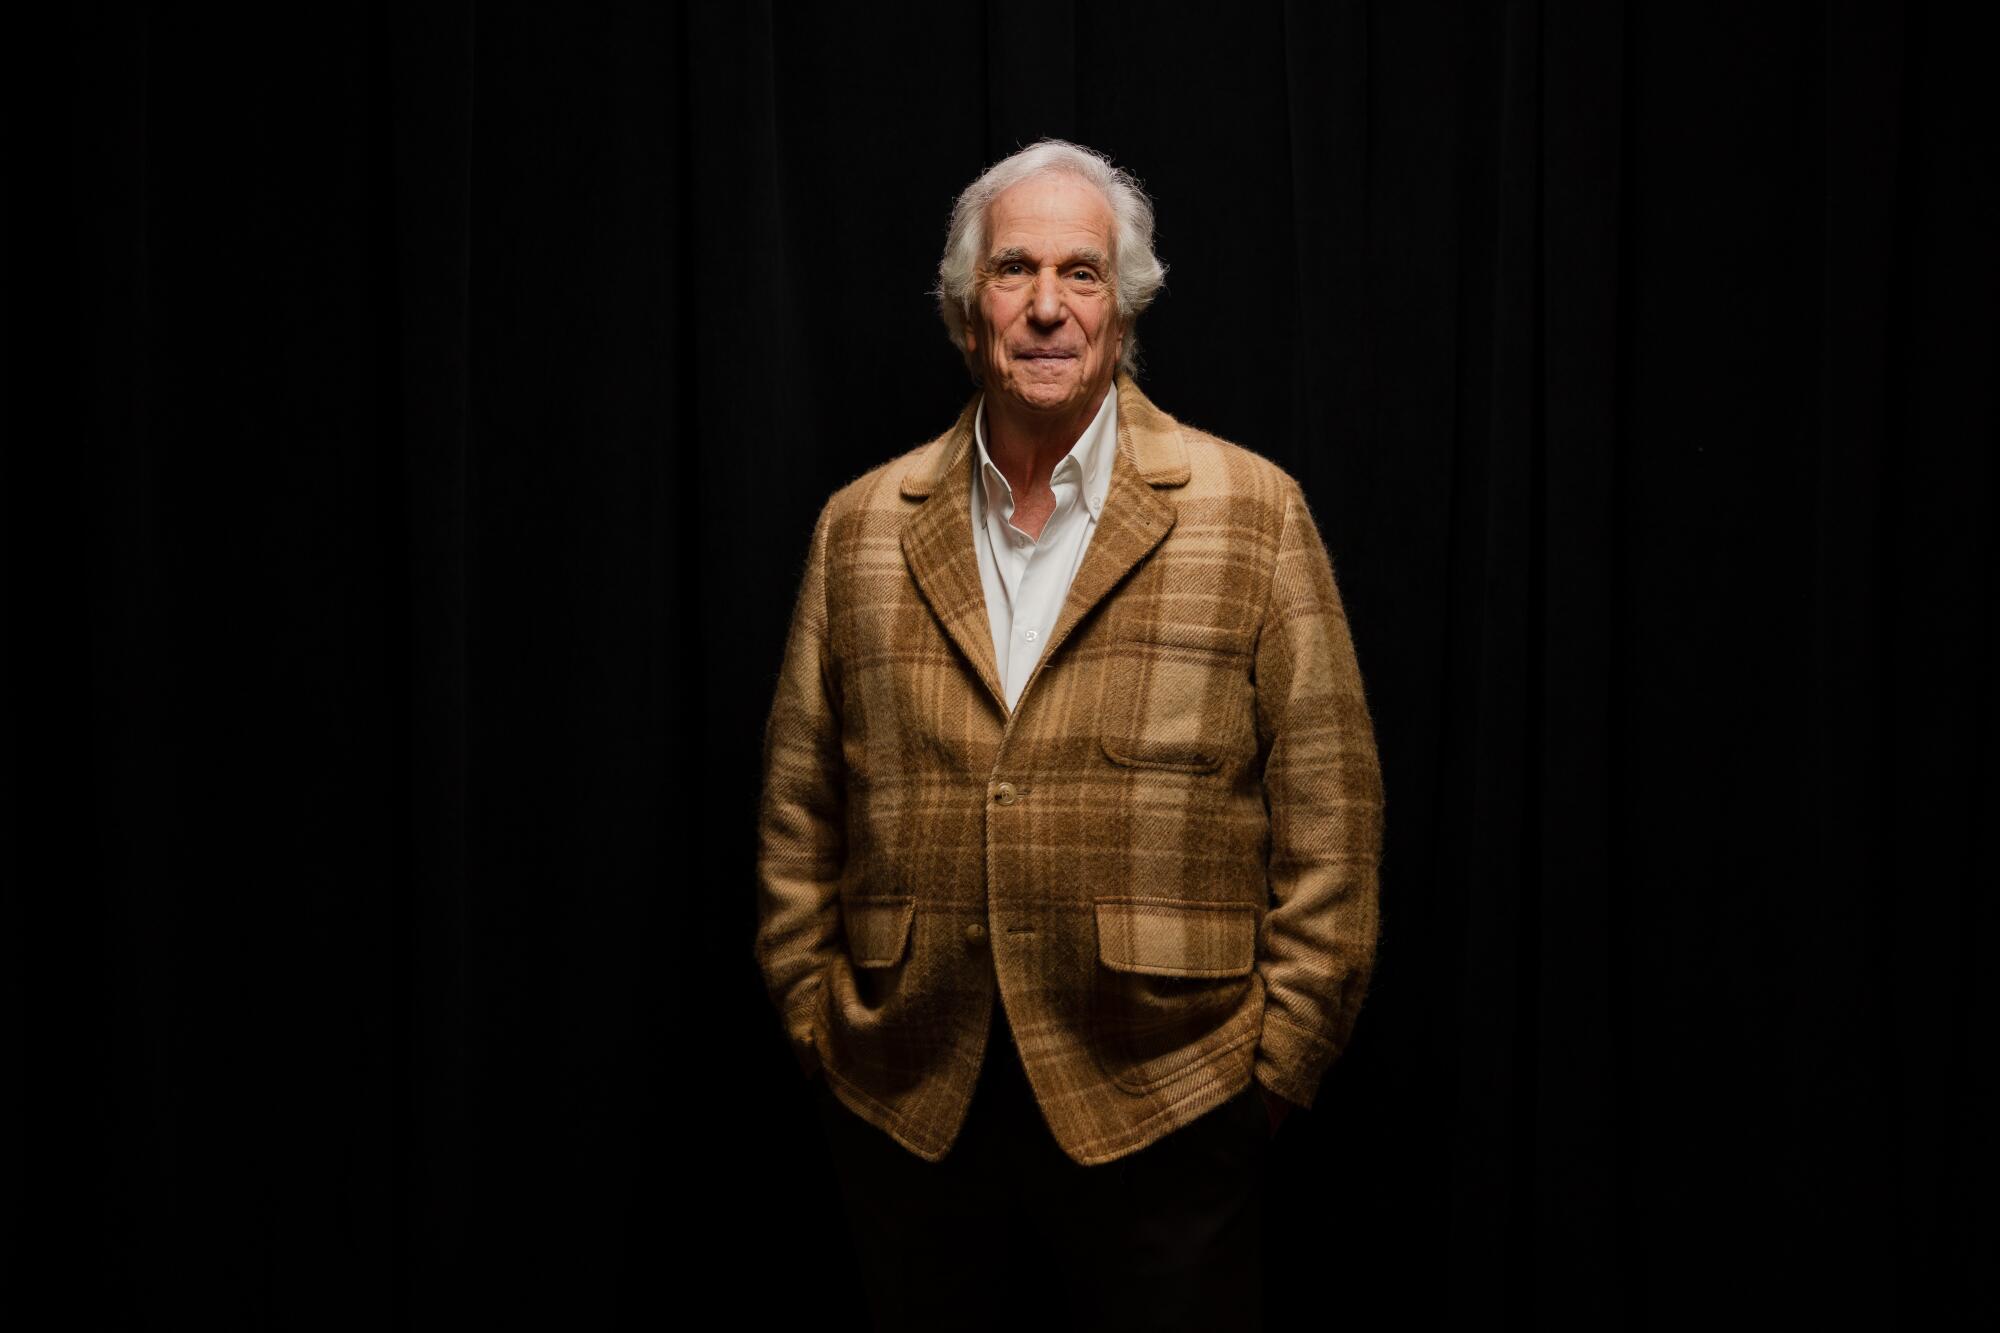 A man in a brown plaid jacket stands against a black background.